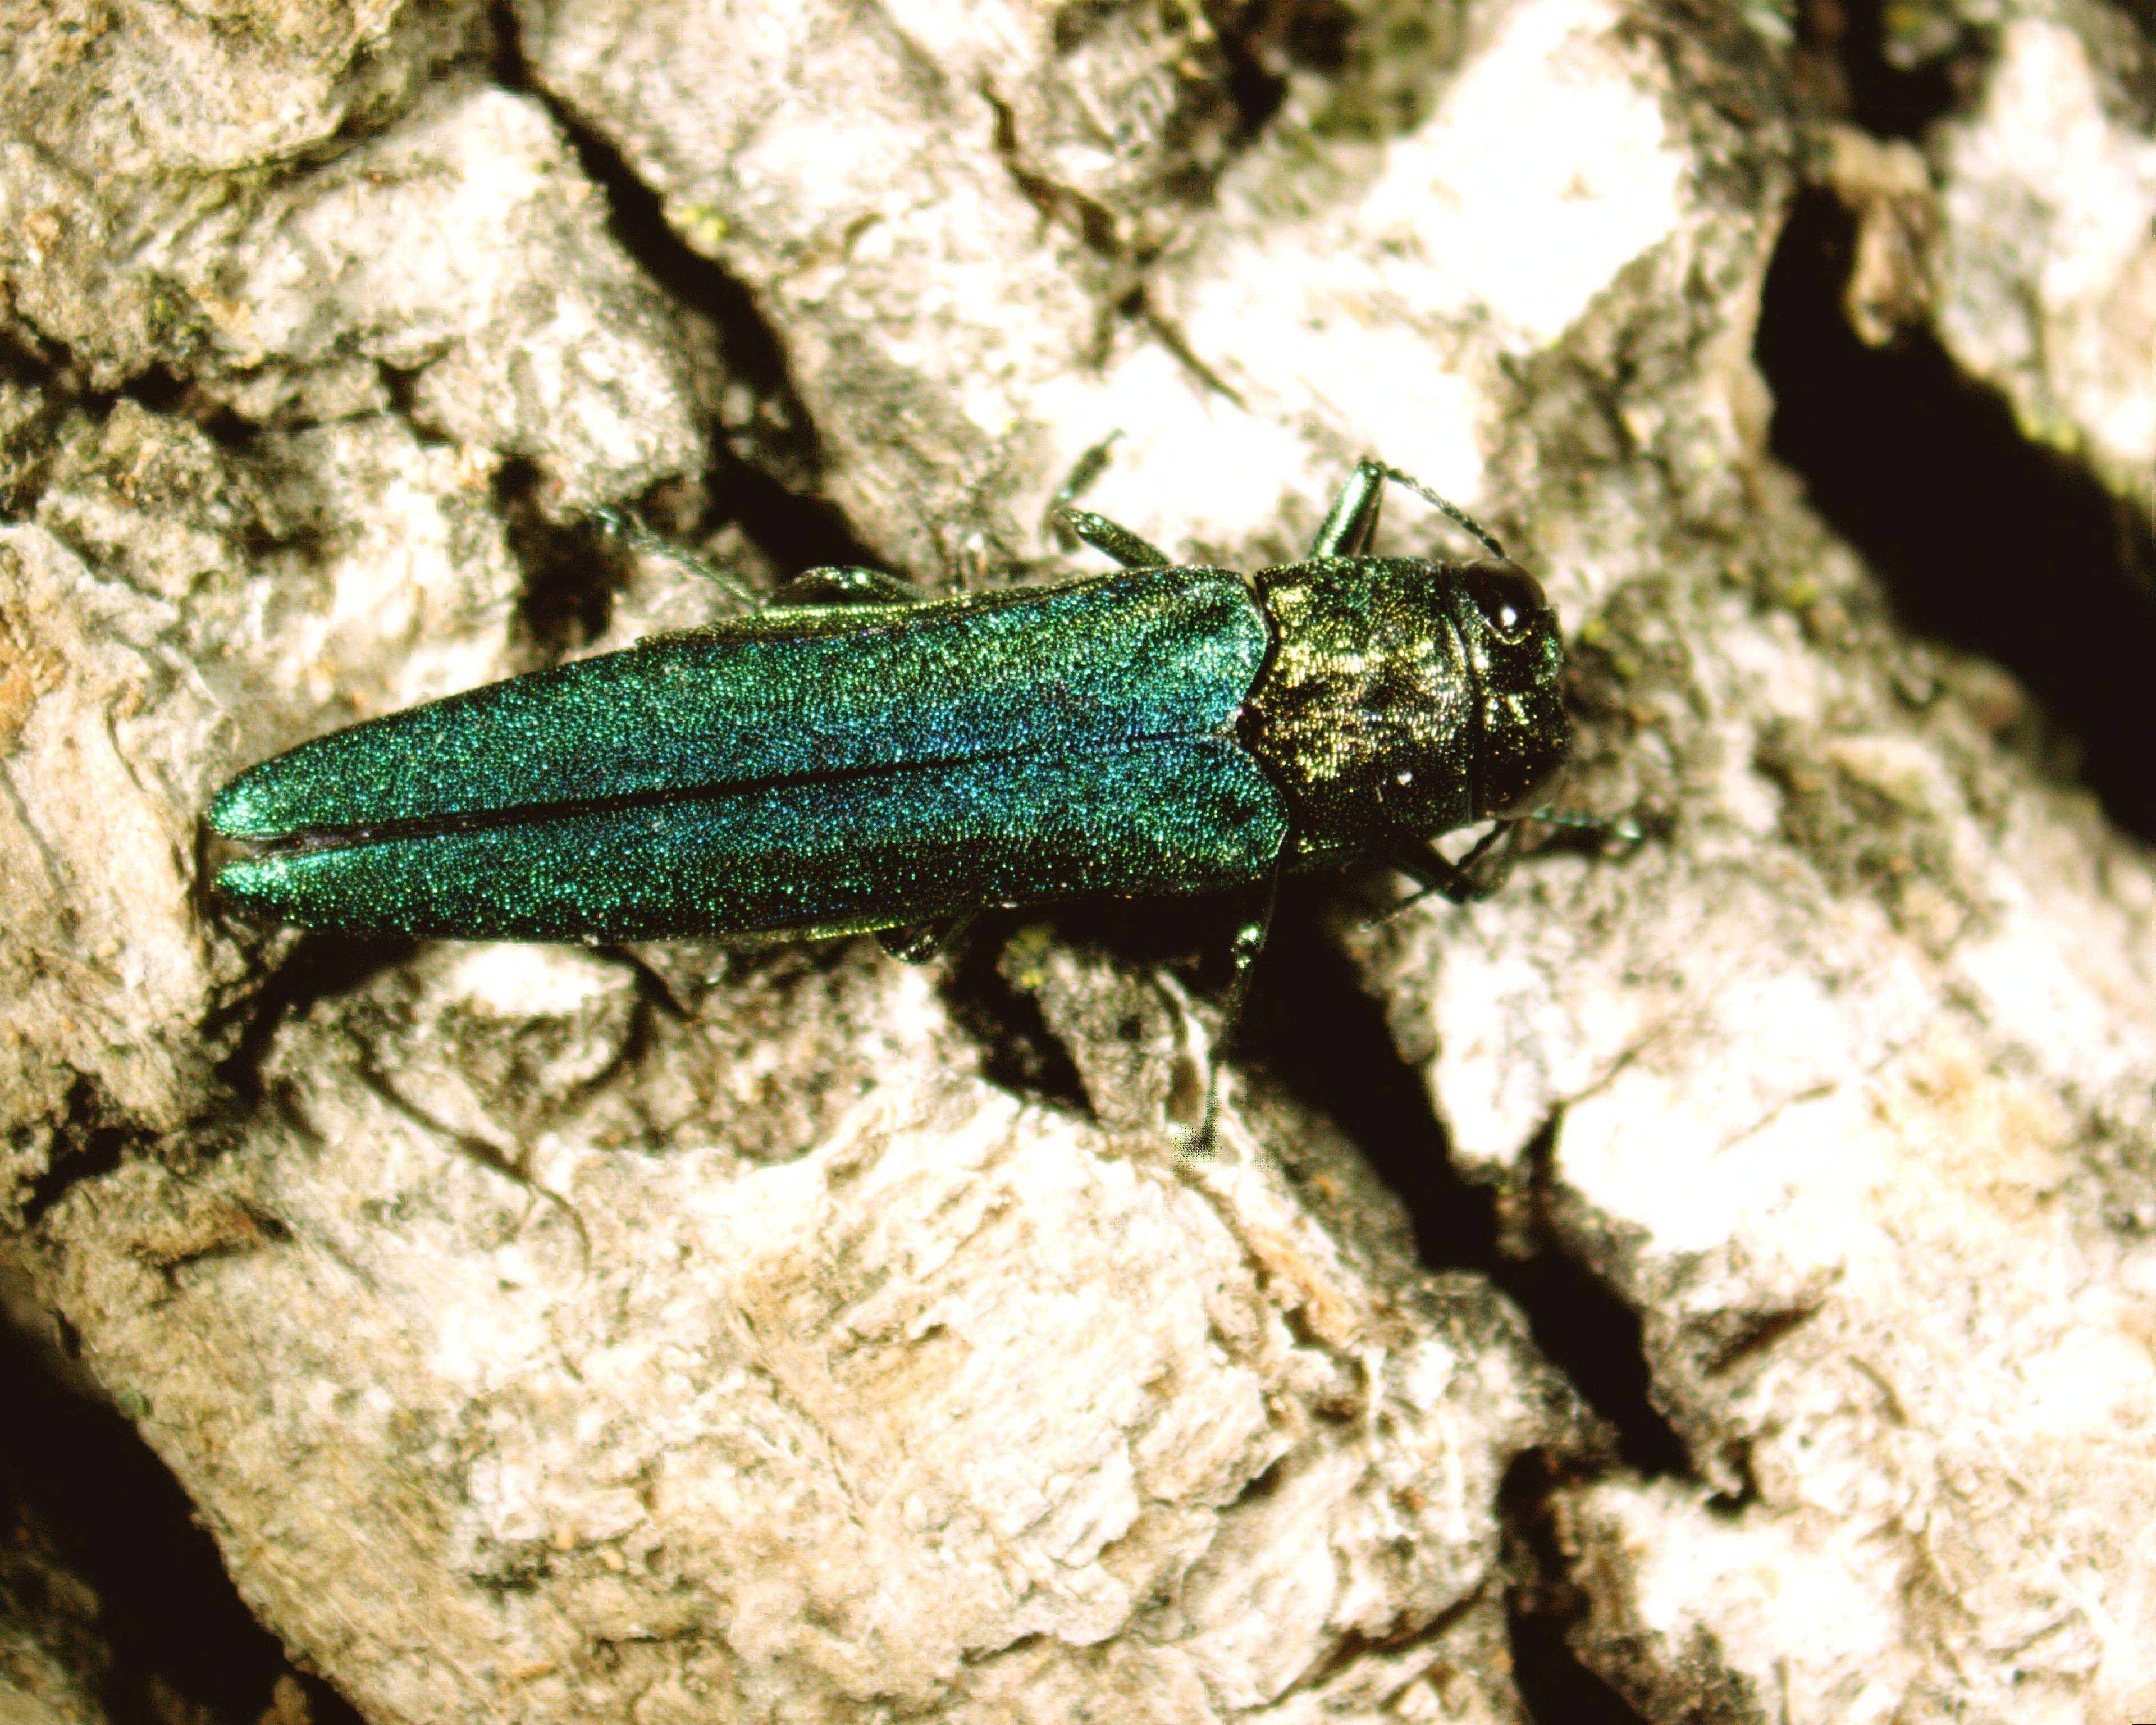 Close up of an adult emerald ash borer on bark of a tree; beetle is bright, metallic green, measures about one-half inch long and has a flattened back.